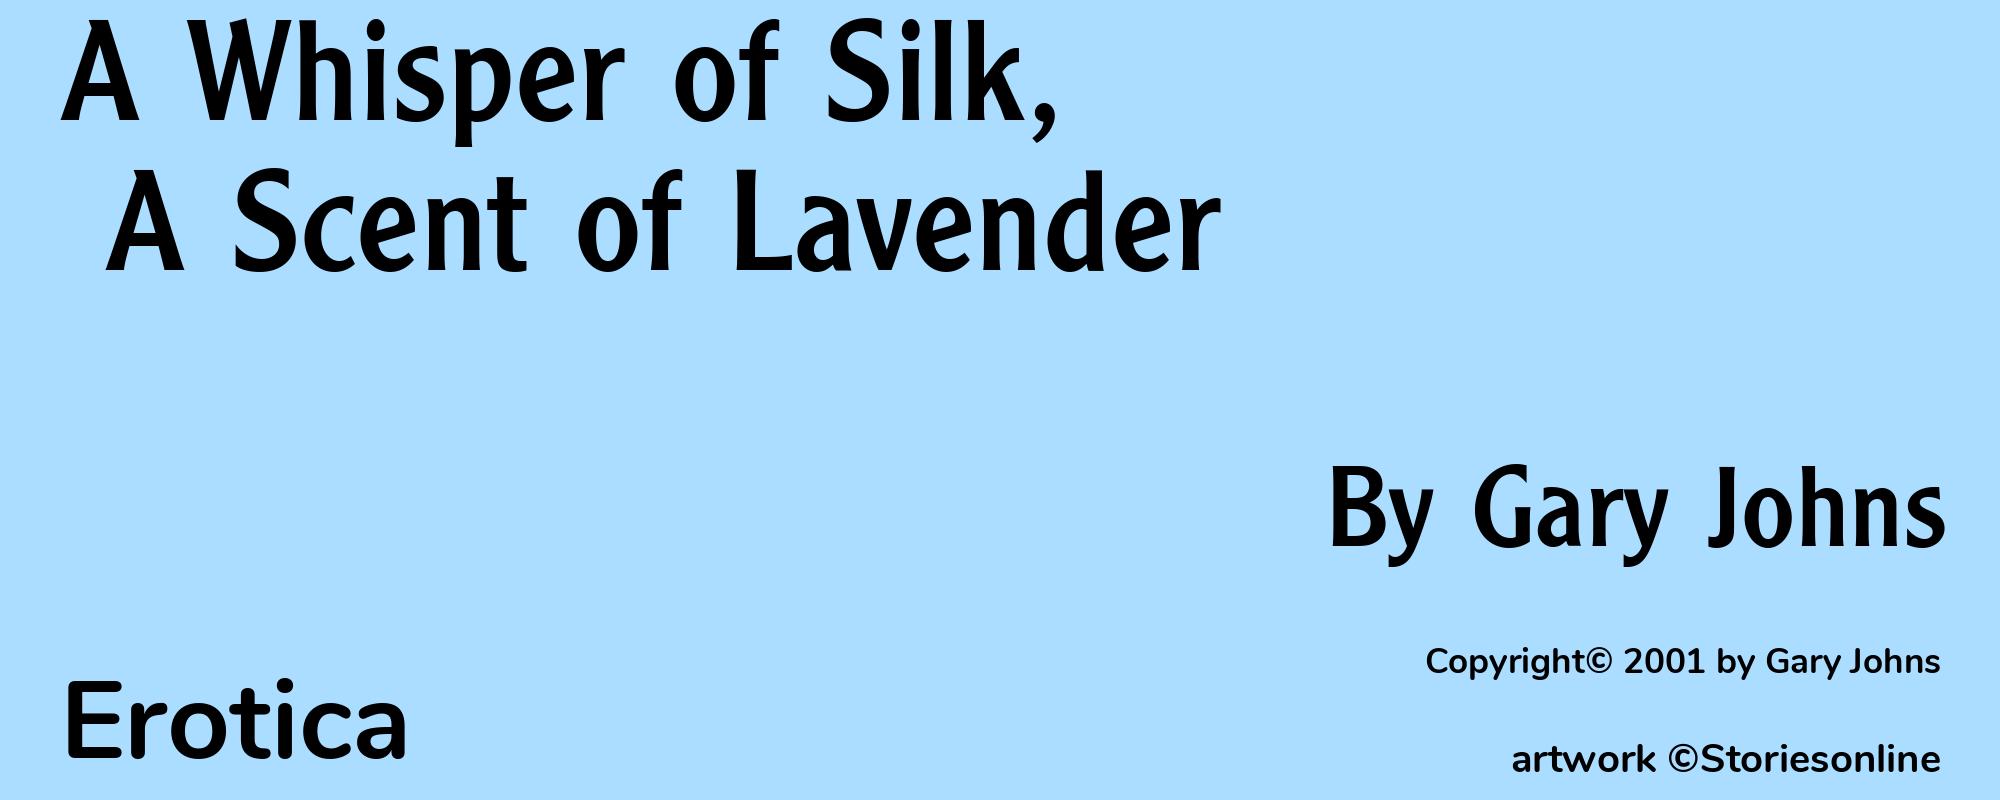 A Whisper of Silk, A Scent of Lavender - Cover